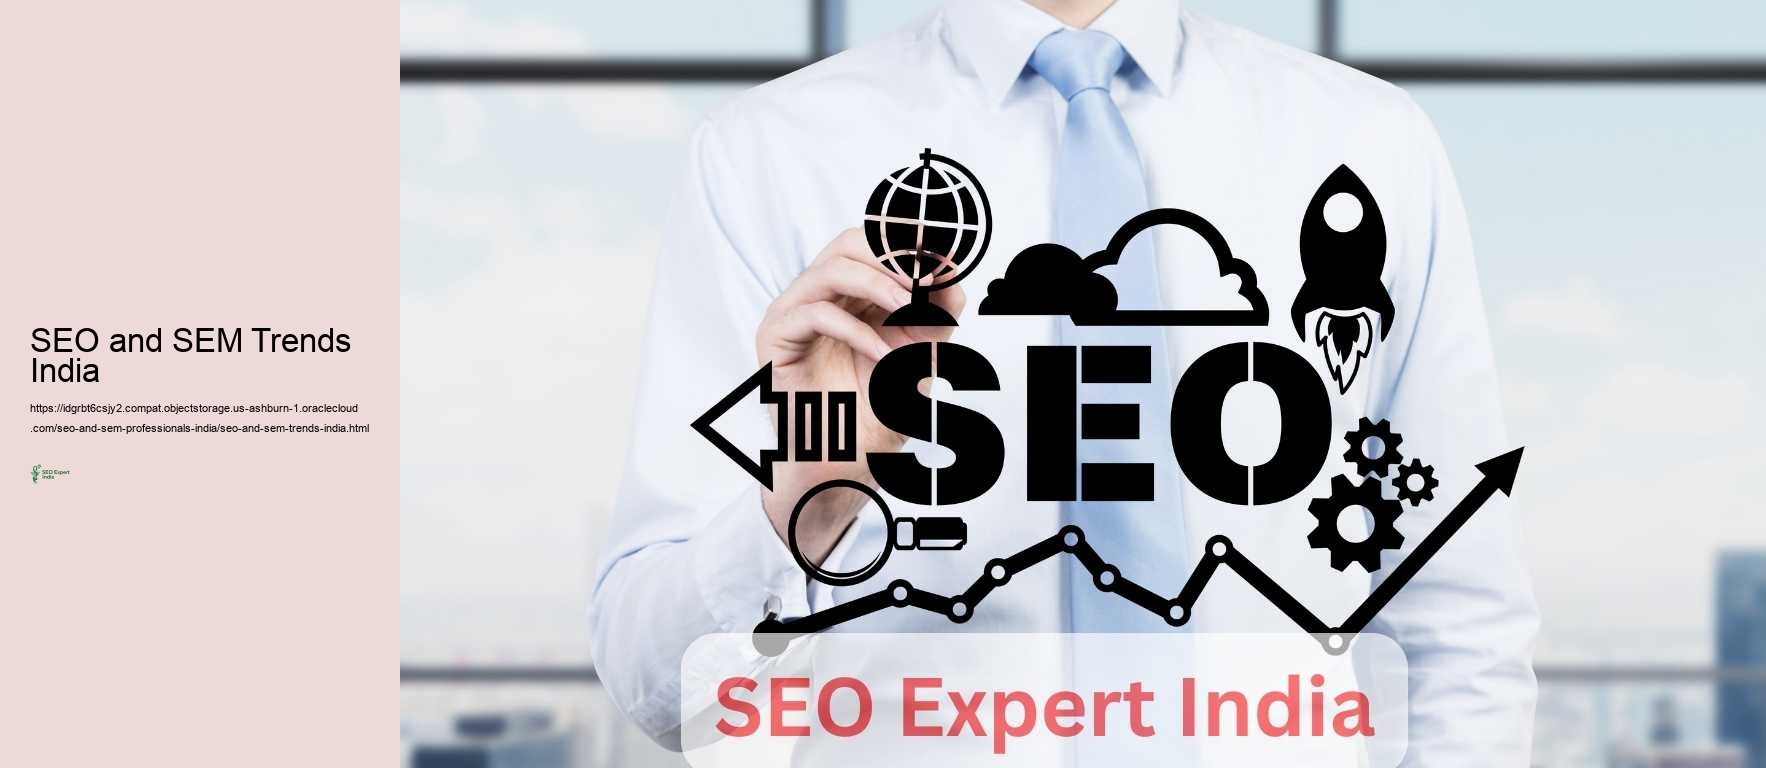 SEO and SEM Trends India